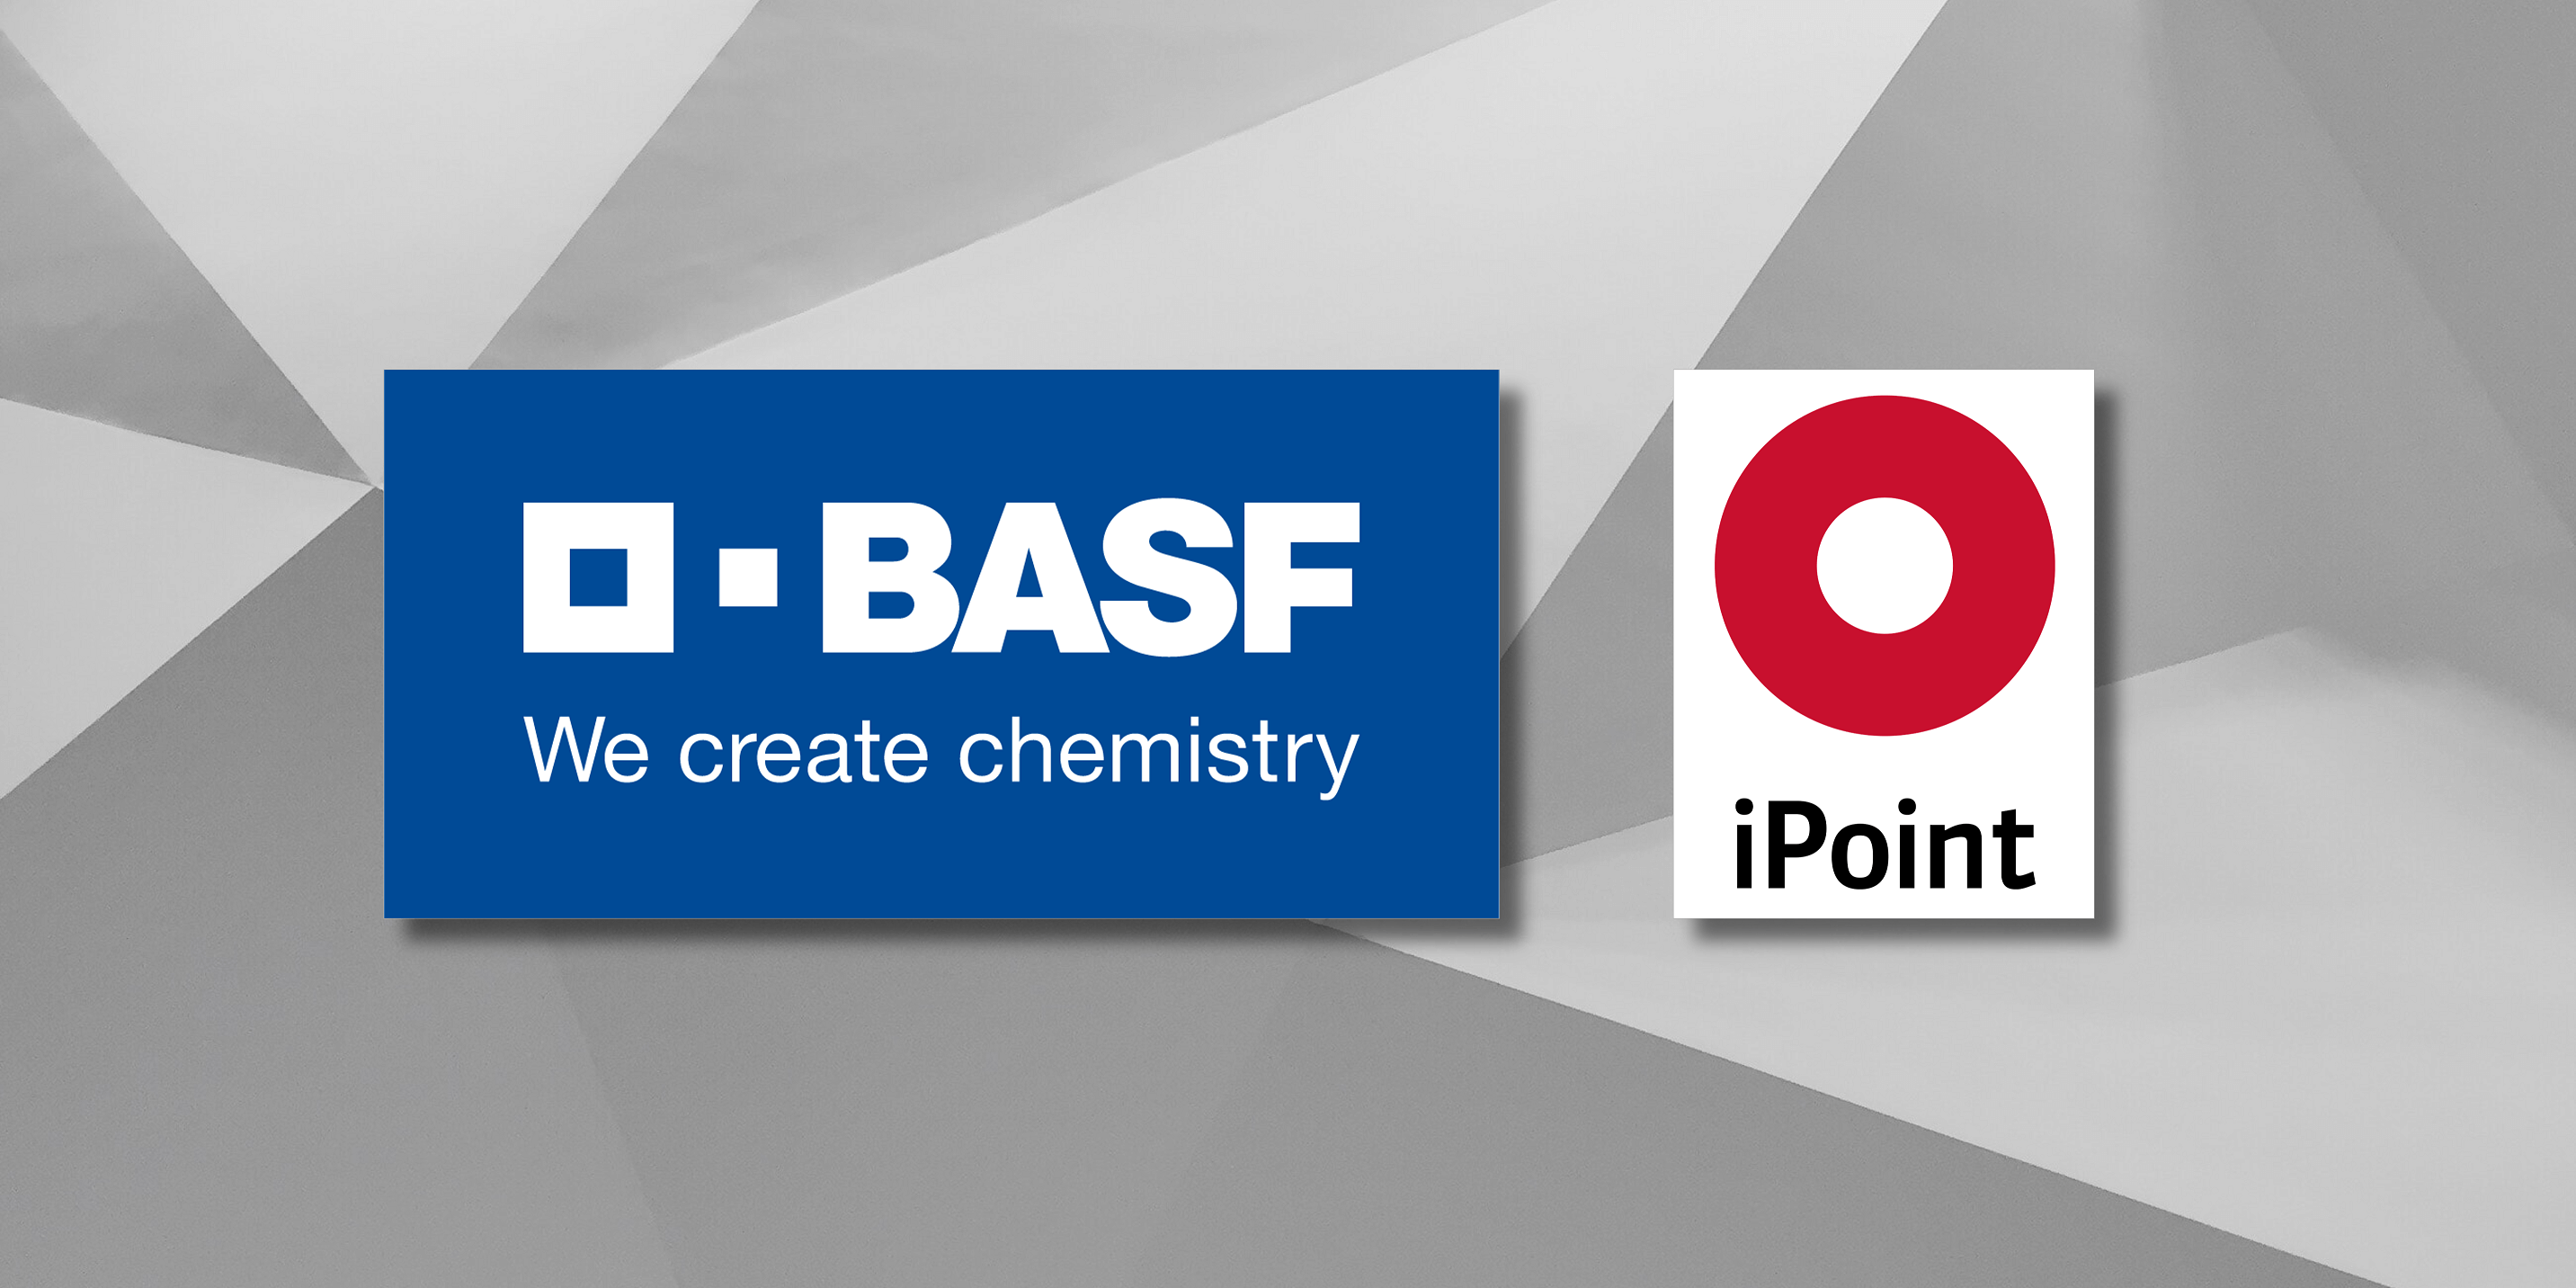 iPoint Partner of BASF